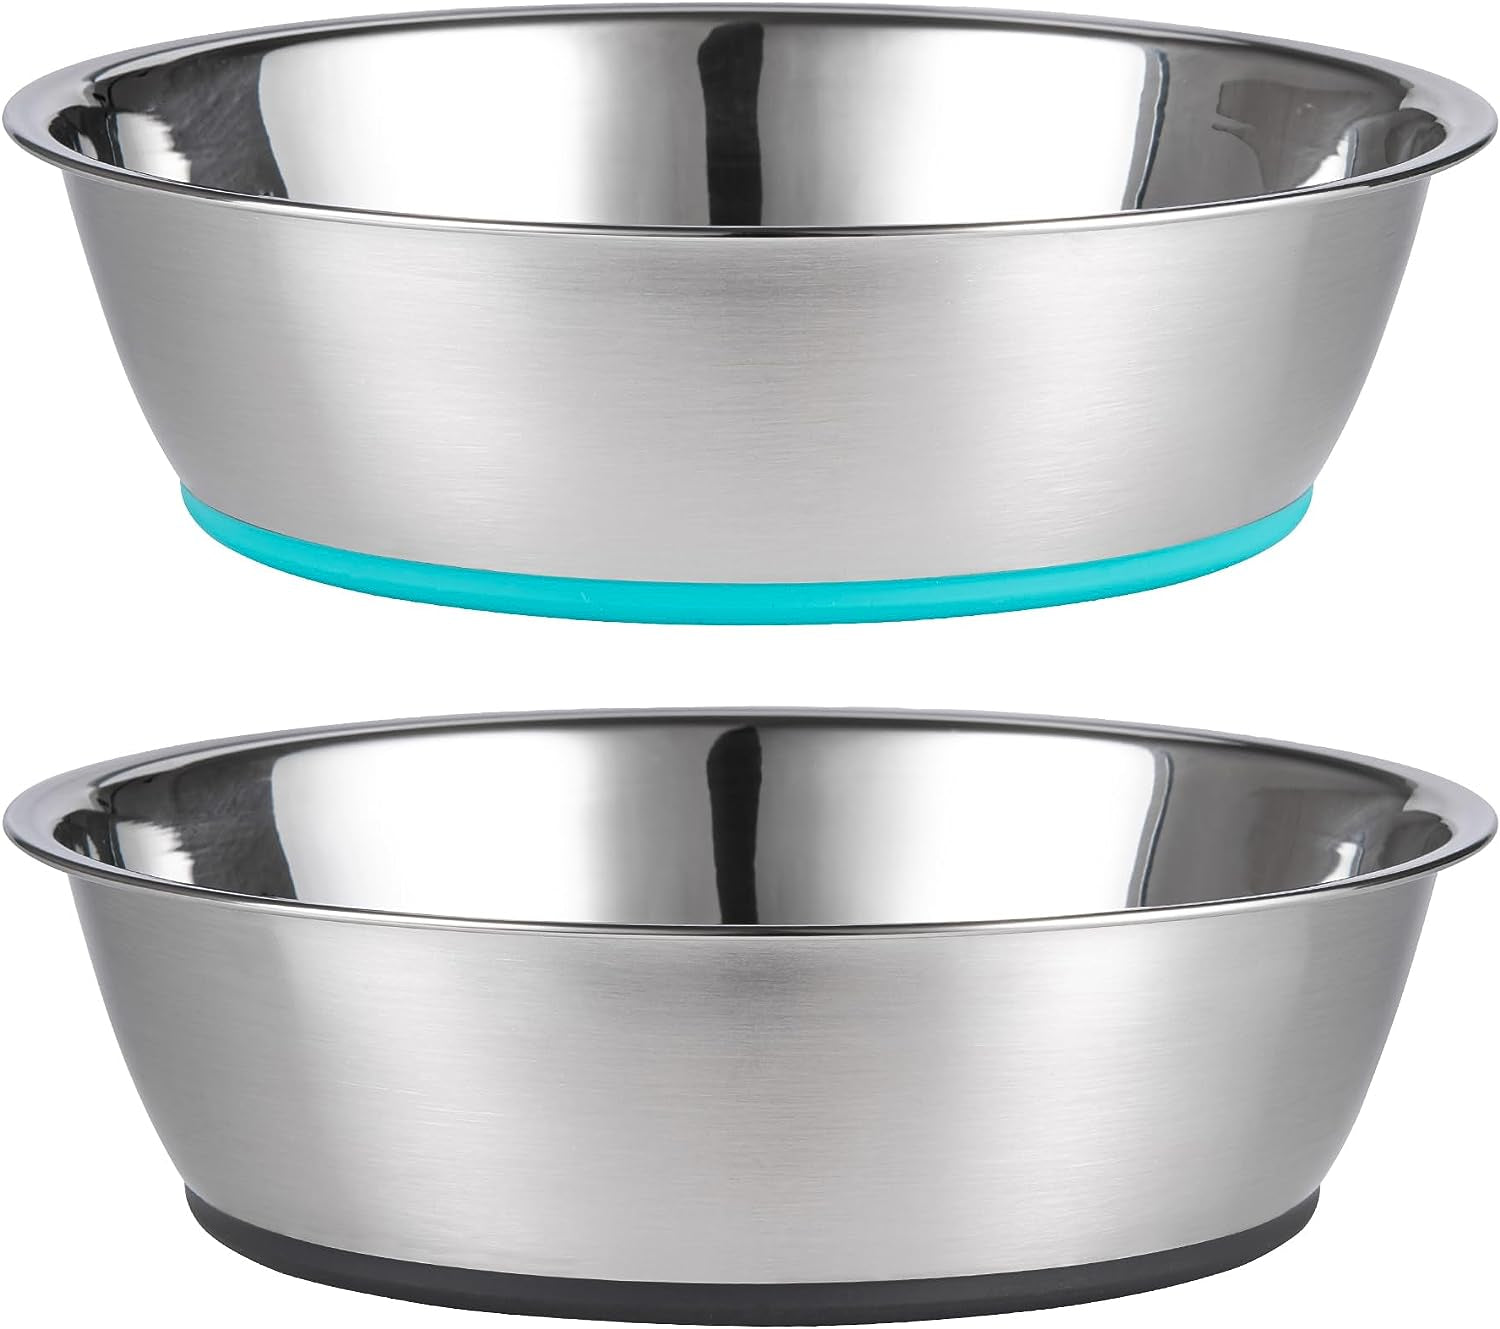 PEGGY11 Lightweight Stainless Steel Cat Bowls - 3 Cup, 2 Pack